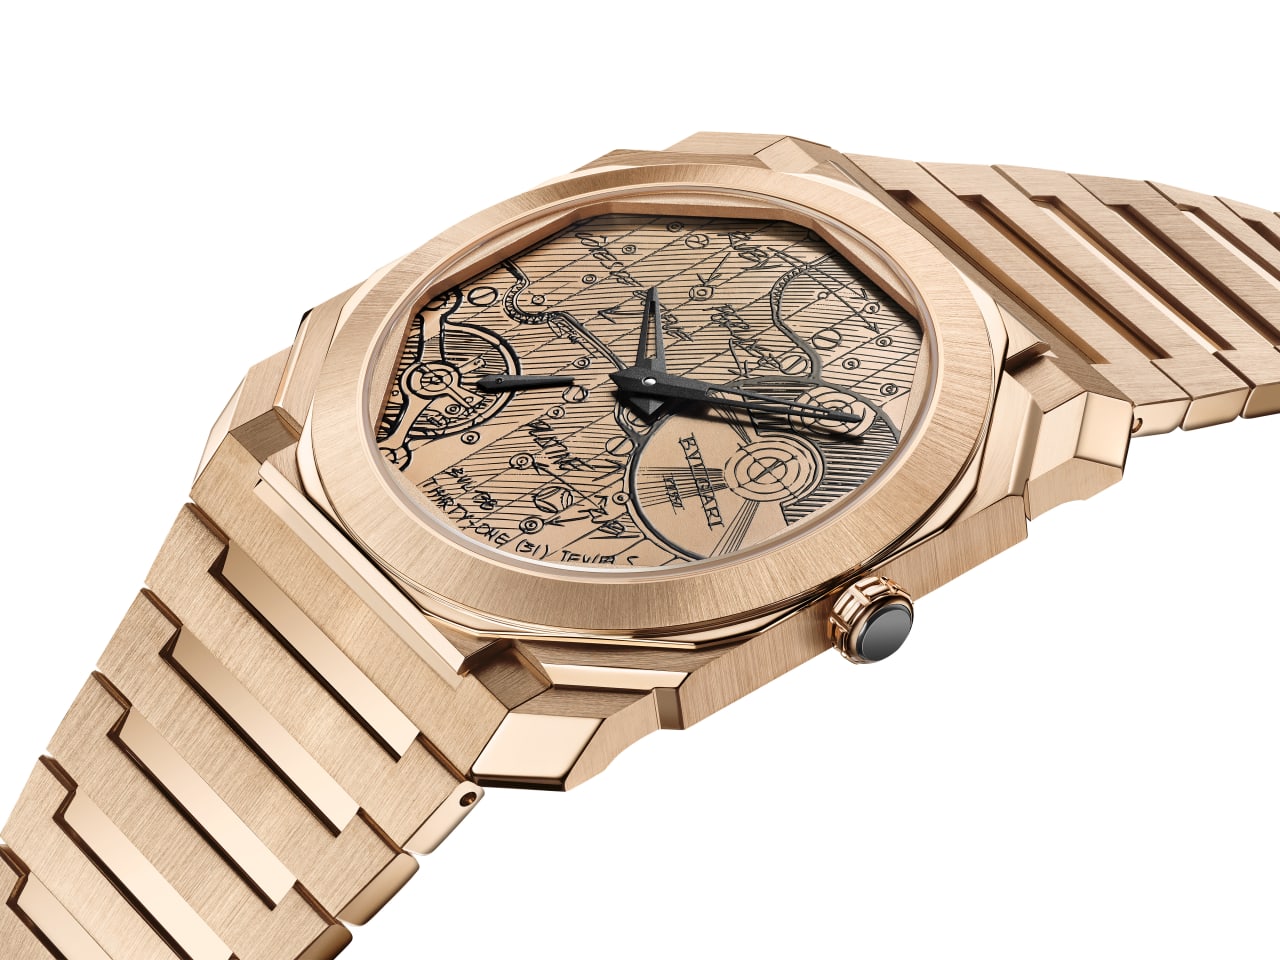 Bulgari's Latest 'Sketched' Watches Are Drawing Attention